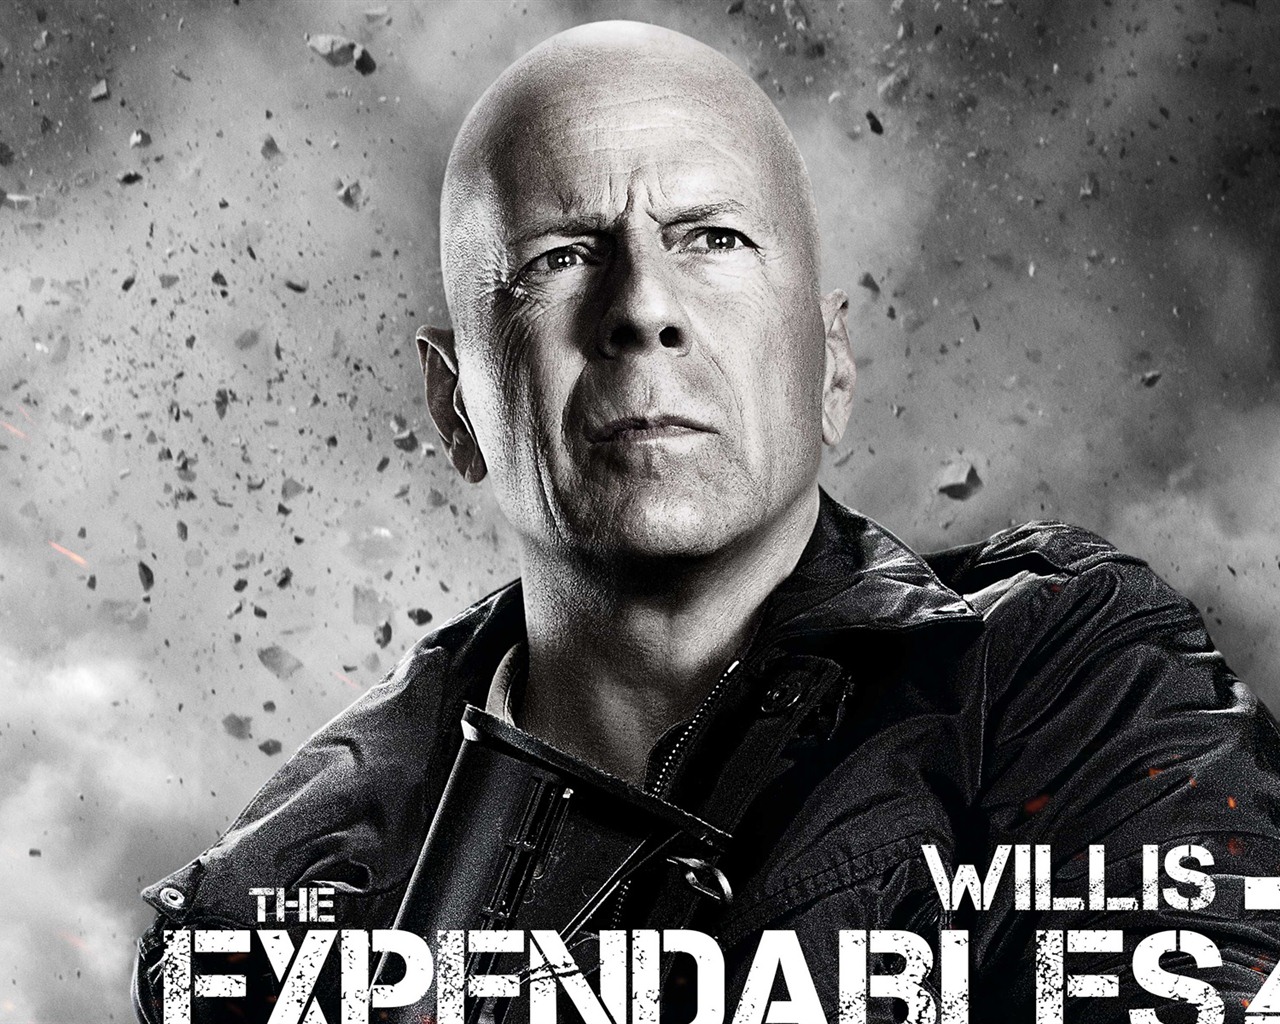 2012 Expendables2 HDの壁紙 #12 - 1280x1024